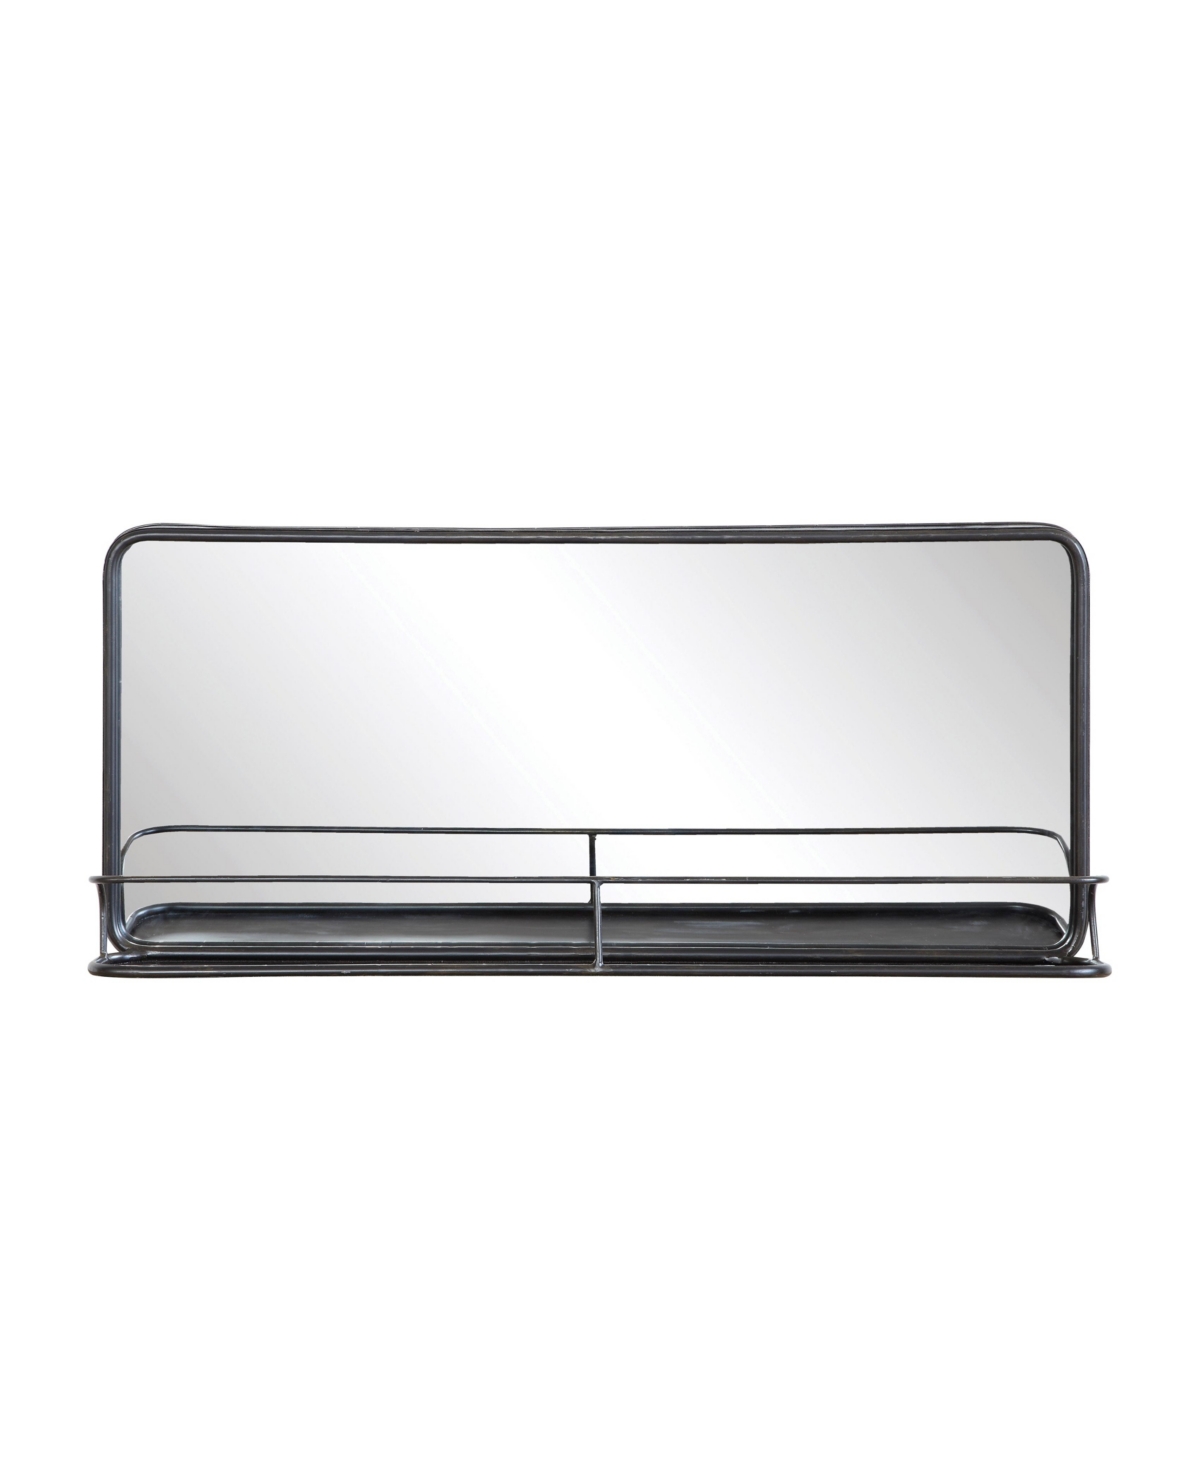 Wide Metal Framed Rectangle Wall Mirror with Shelf, Black - Grey